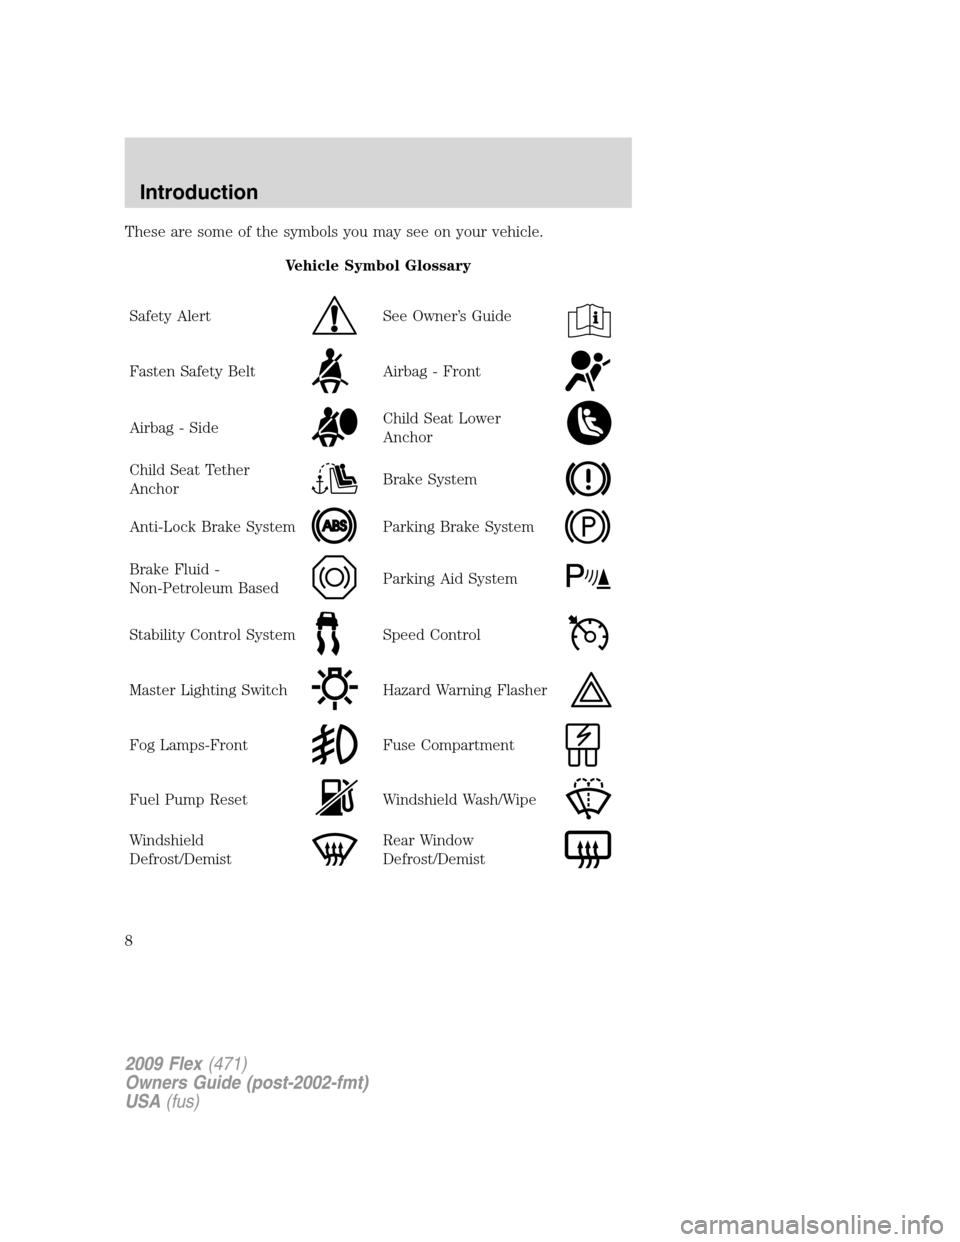 FORD FLEX 2009 1.G Owners Manual These are some of the symbols you may see on your vehicle.
Vehicle Symbol Glossary
Safety Alert
See Owner’s Guide
Fasten Safety BeltAirbag - Front
Airbag - SideChild Seat Lower
Anchor
Child Seat Tet